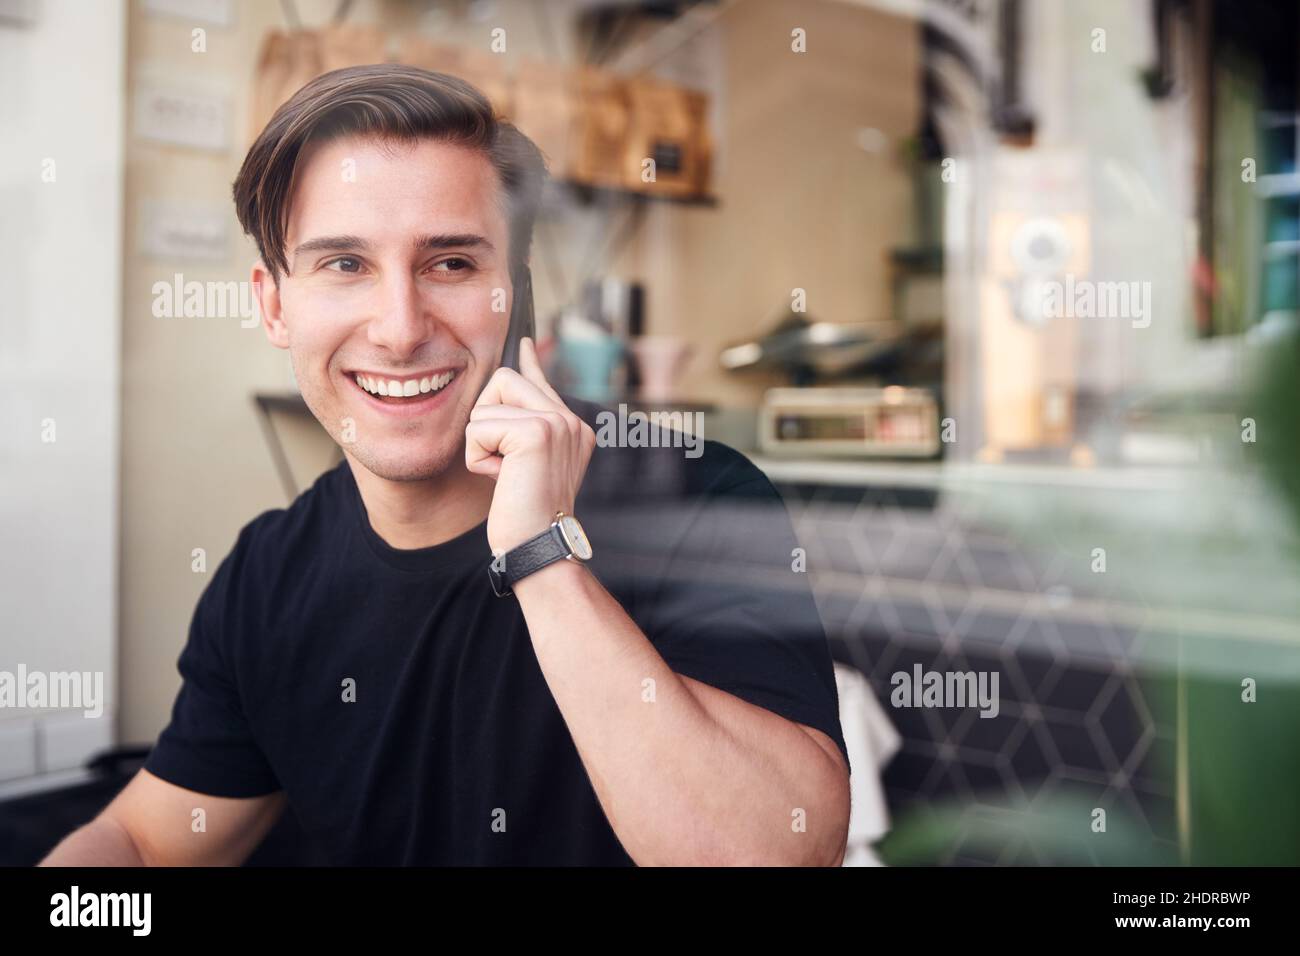 man, smiling, cafe, on the phone, guy, men, smile, cafes, on the phones Stock Photo